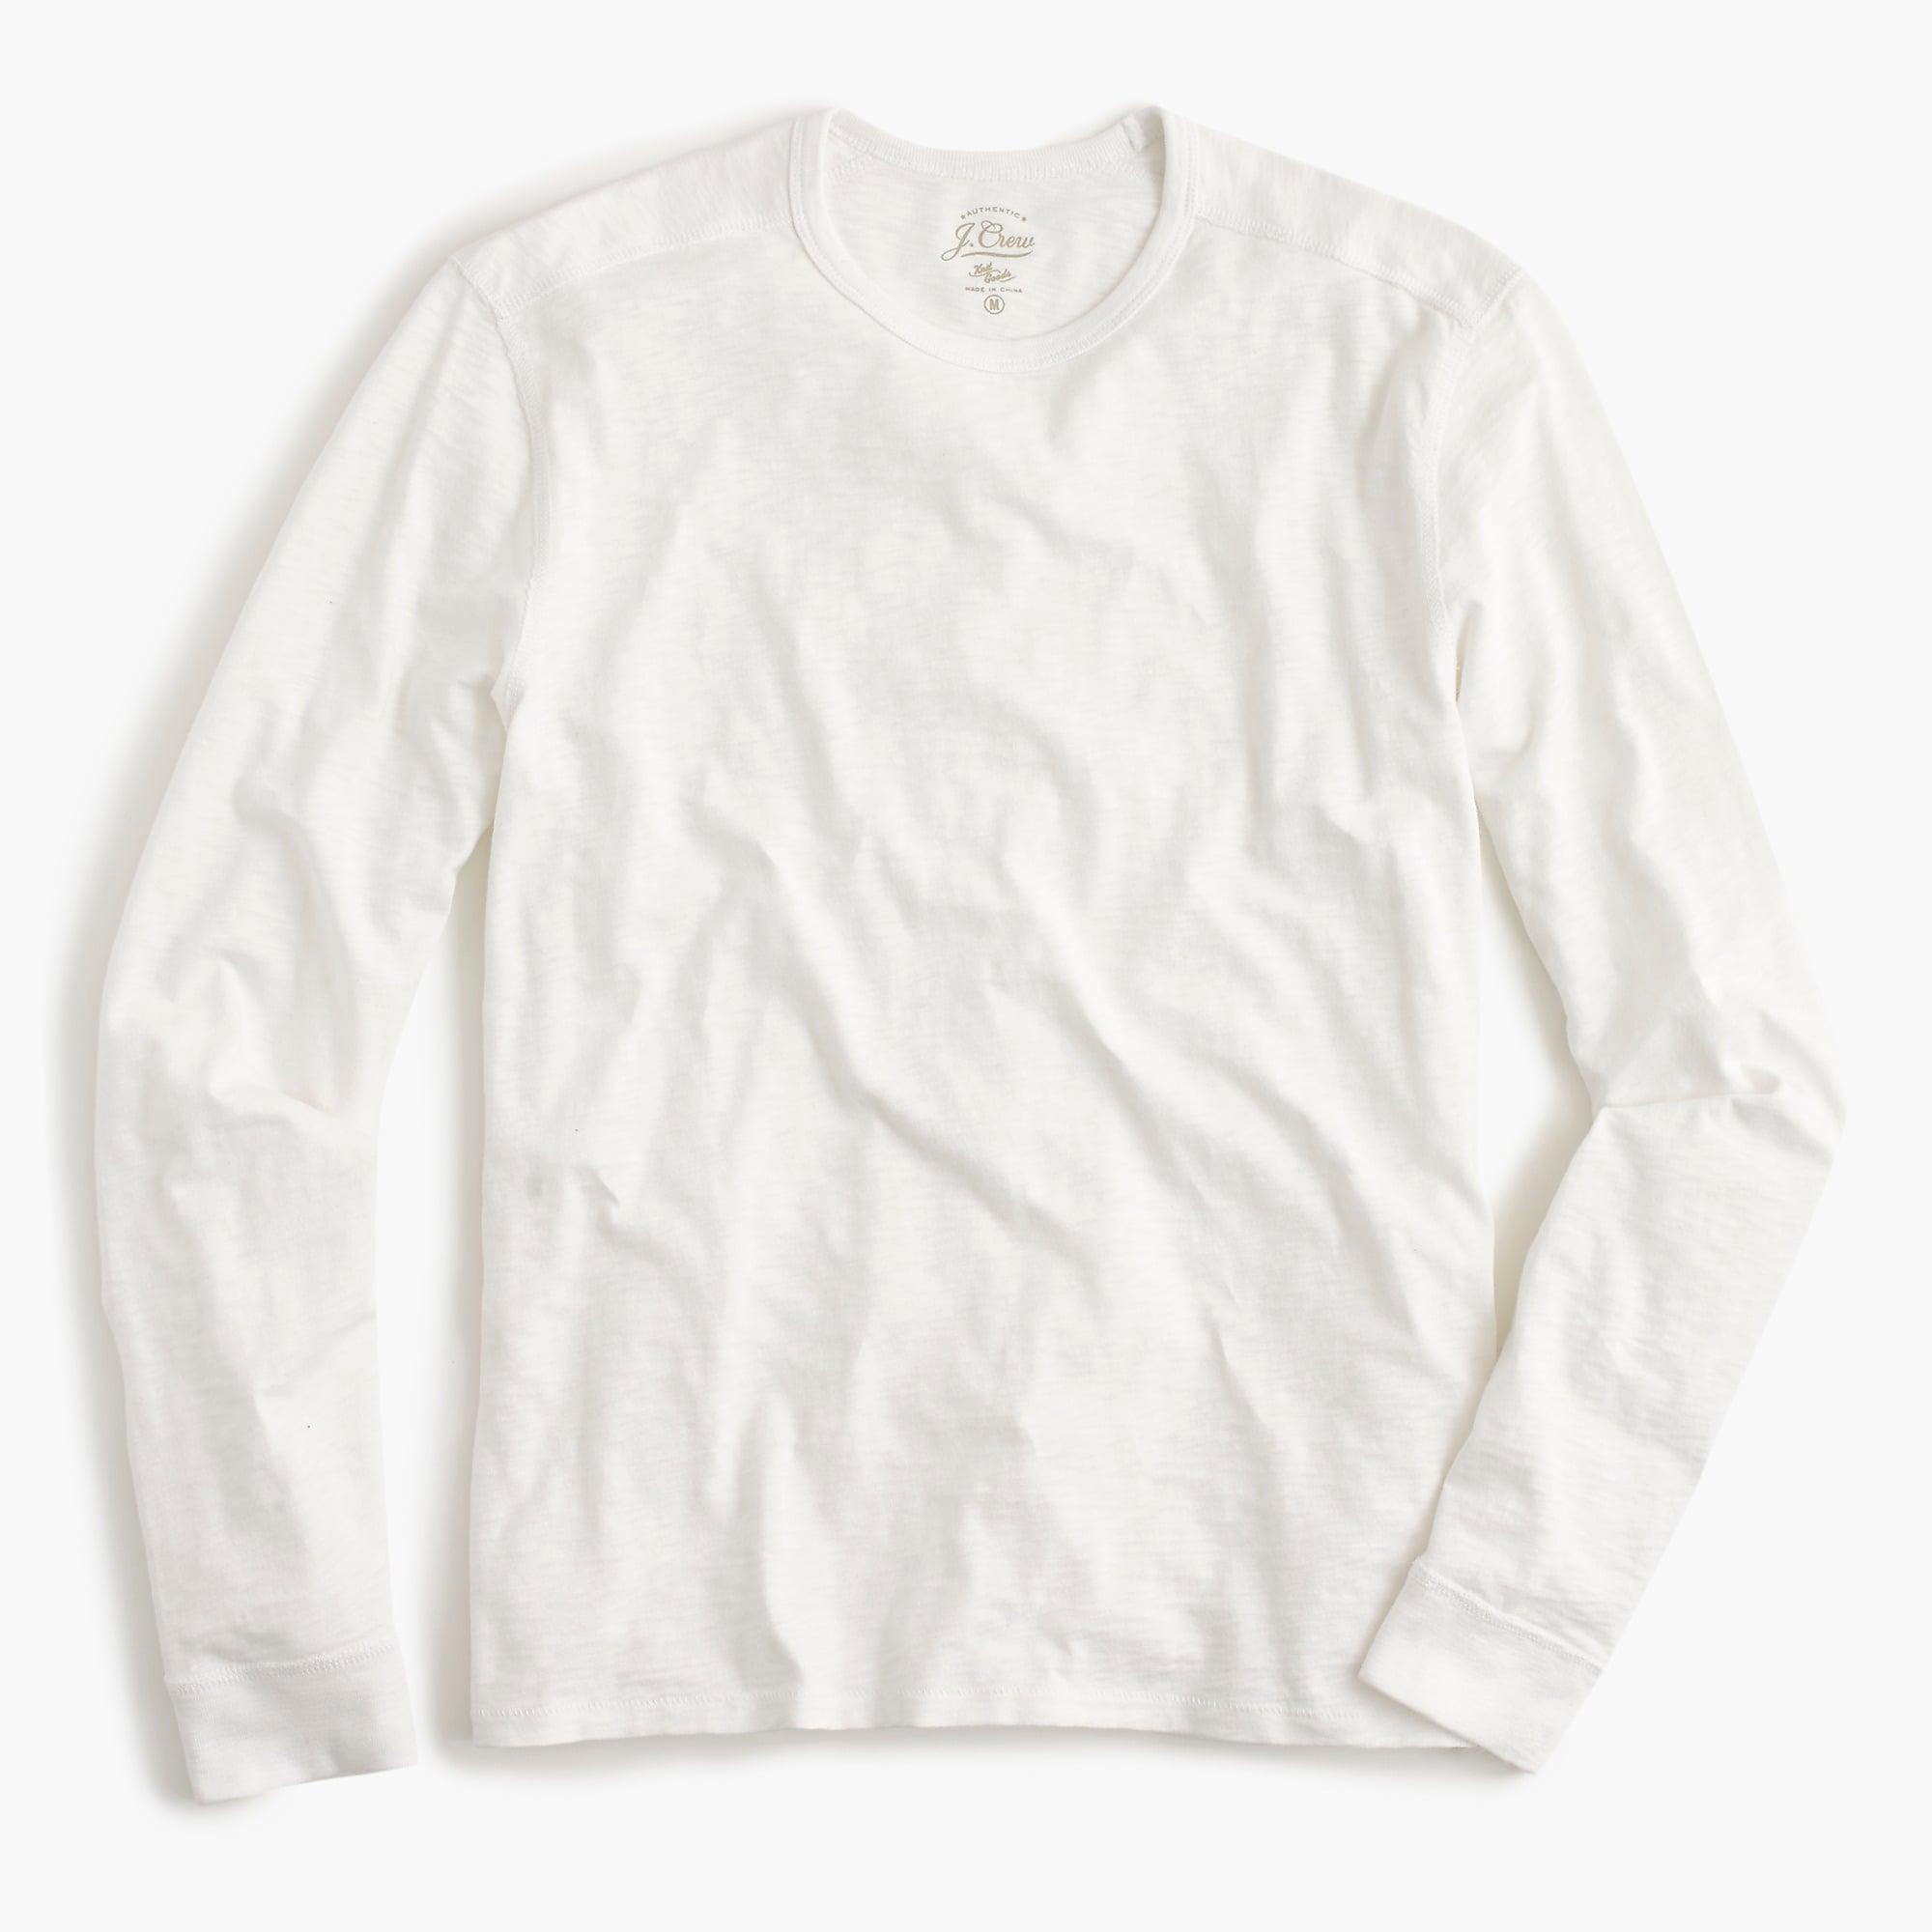 J.Crew Long-sleeve Textured Cotton T-shirt in White for Men - Lyst